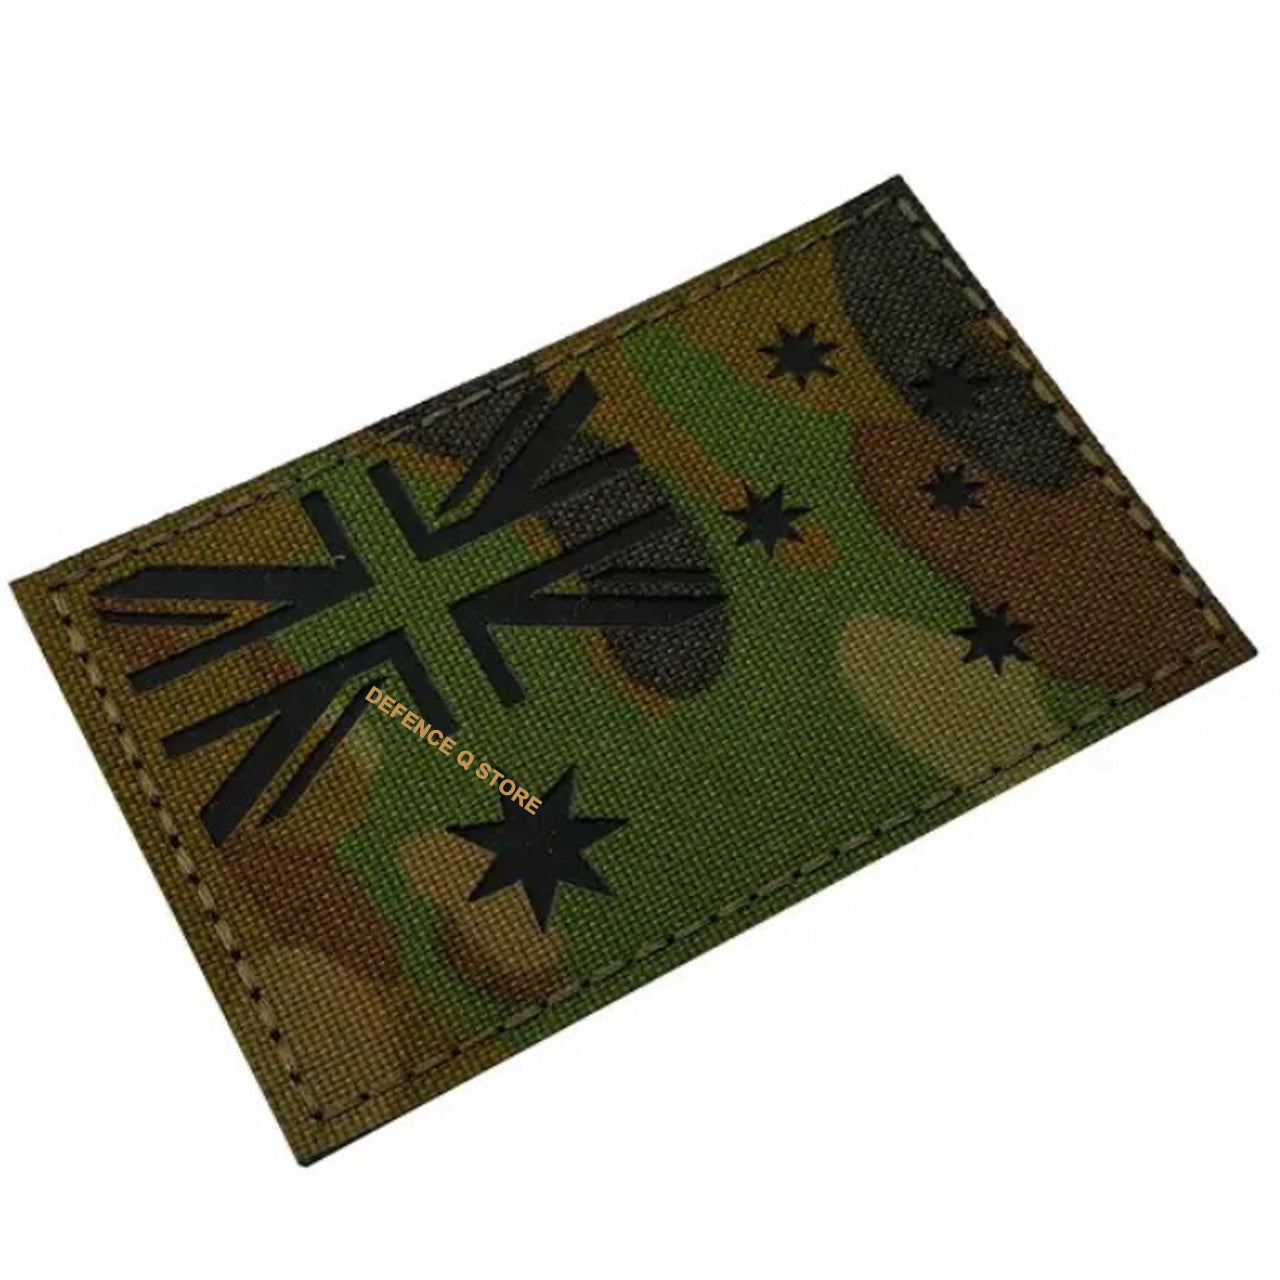 Get ready to proudly display your love for Australia with our AMCU Australian Multicam Flag Laser Cut Morale Patch! Measuring at 8x5cm and featuring a hook and loop backing, this patch is easy to attach and will stay securely in place. Show off your patriotism and style with this must-have accessory! www.defenceqstore.com.au